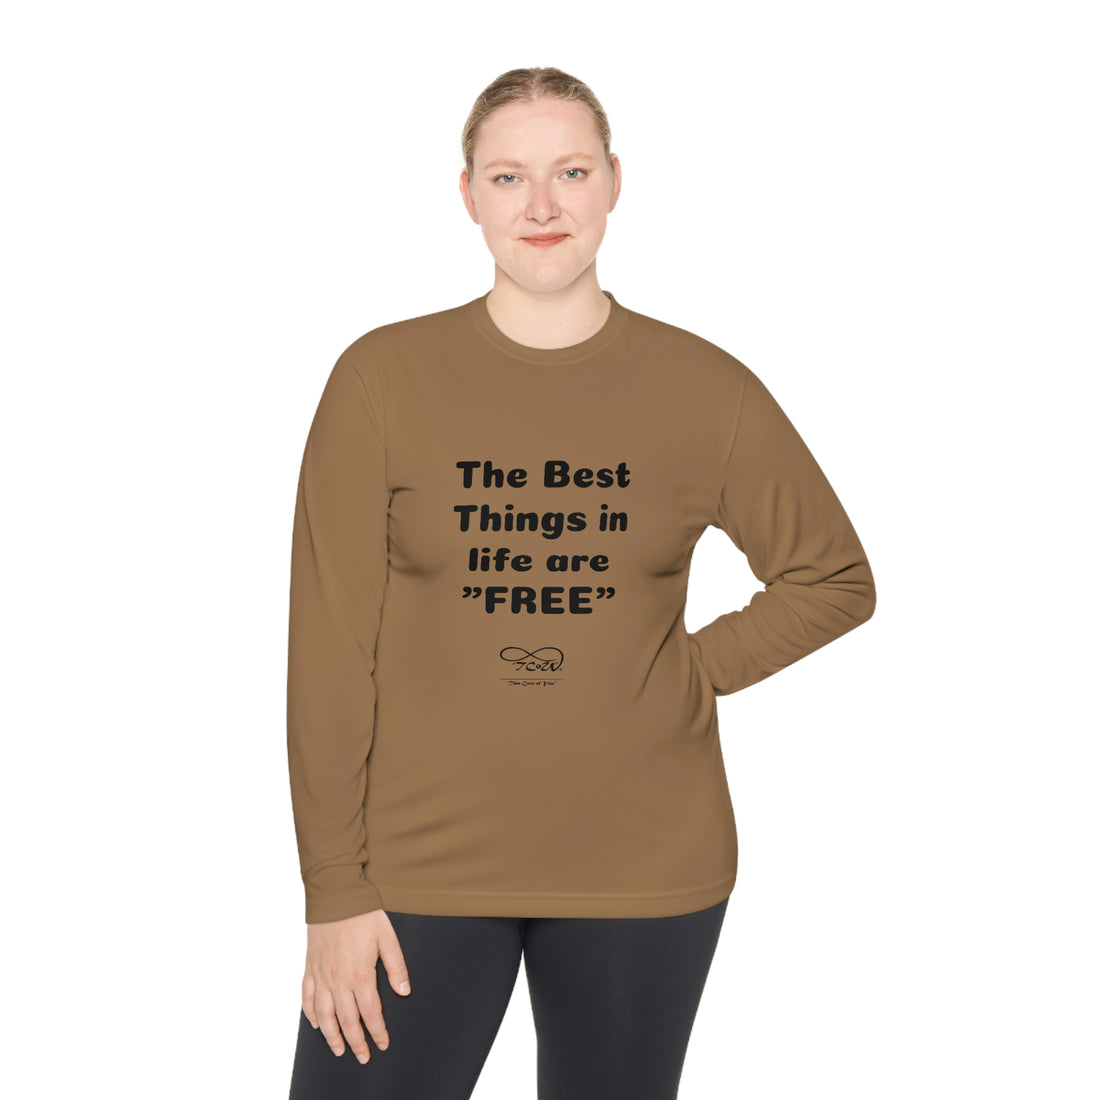 FUN QUOTES -- "Best Things in Life are FREE” — Unless it's her birthday!! — Unisex Lightweight Long Sleeve Tee